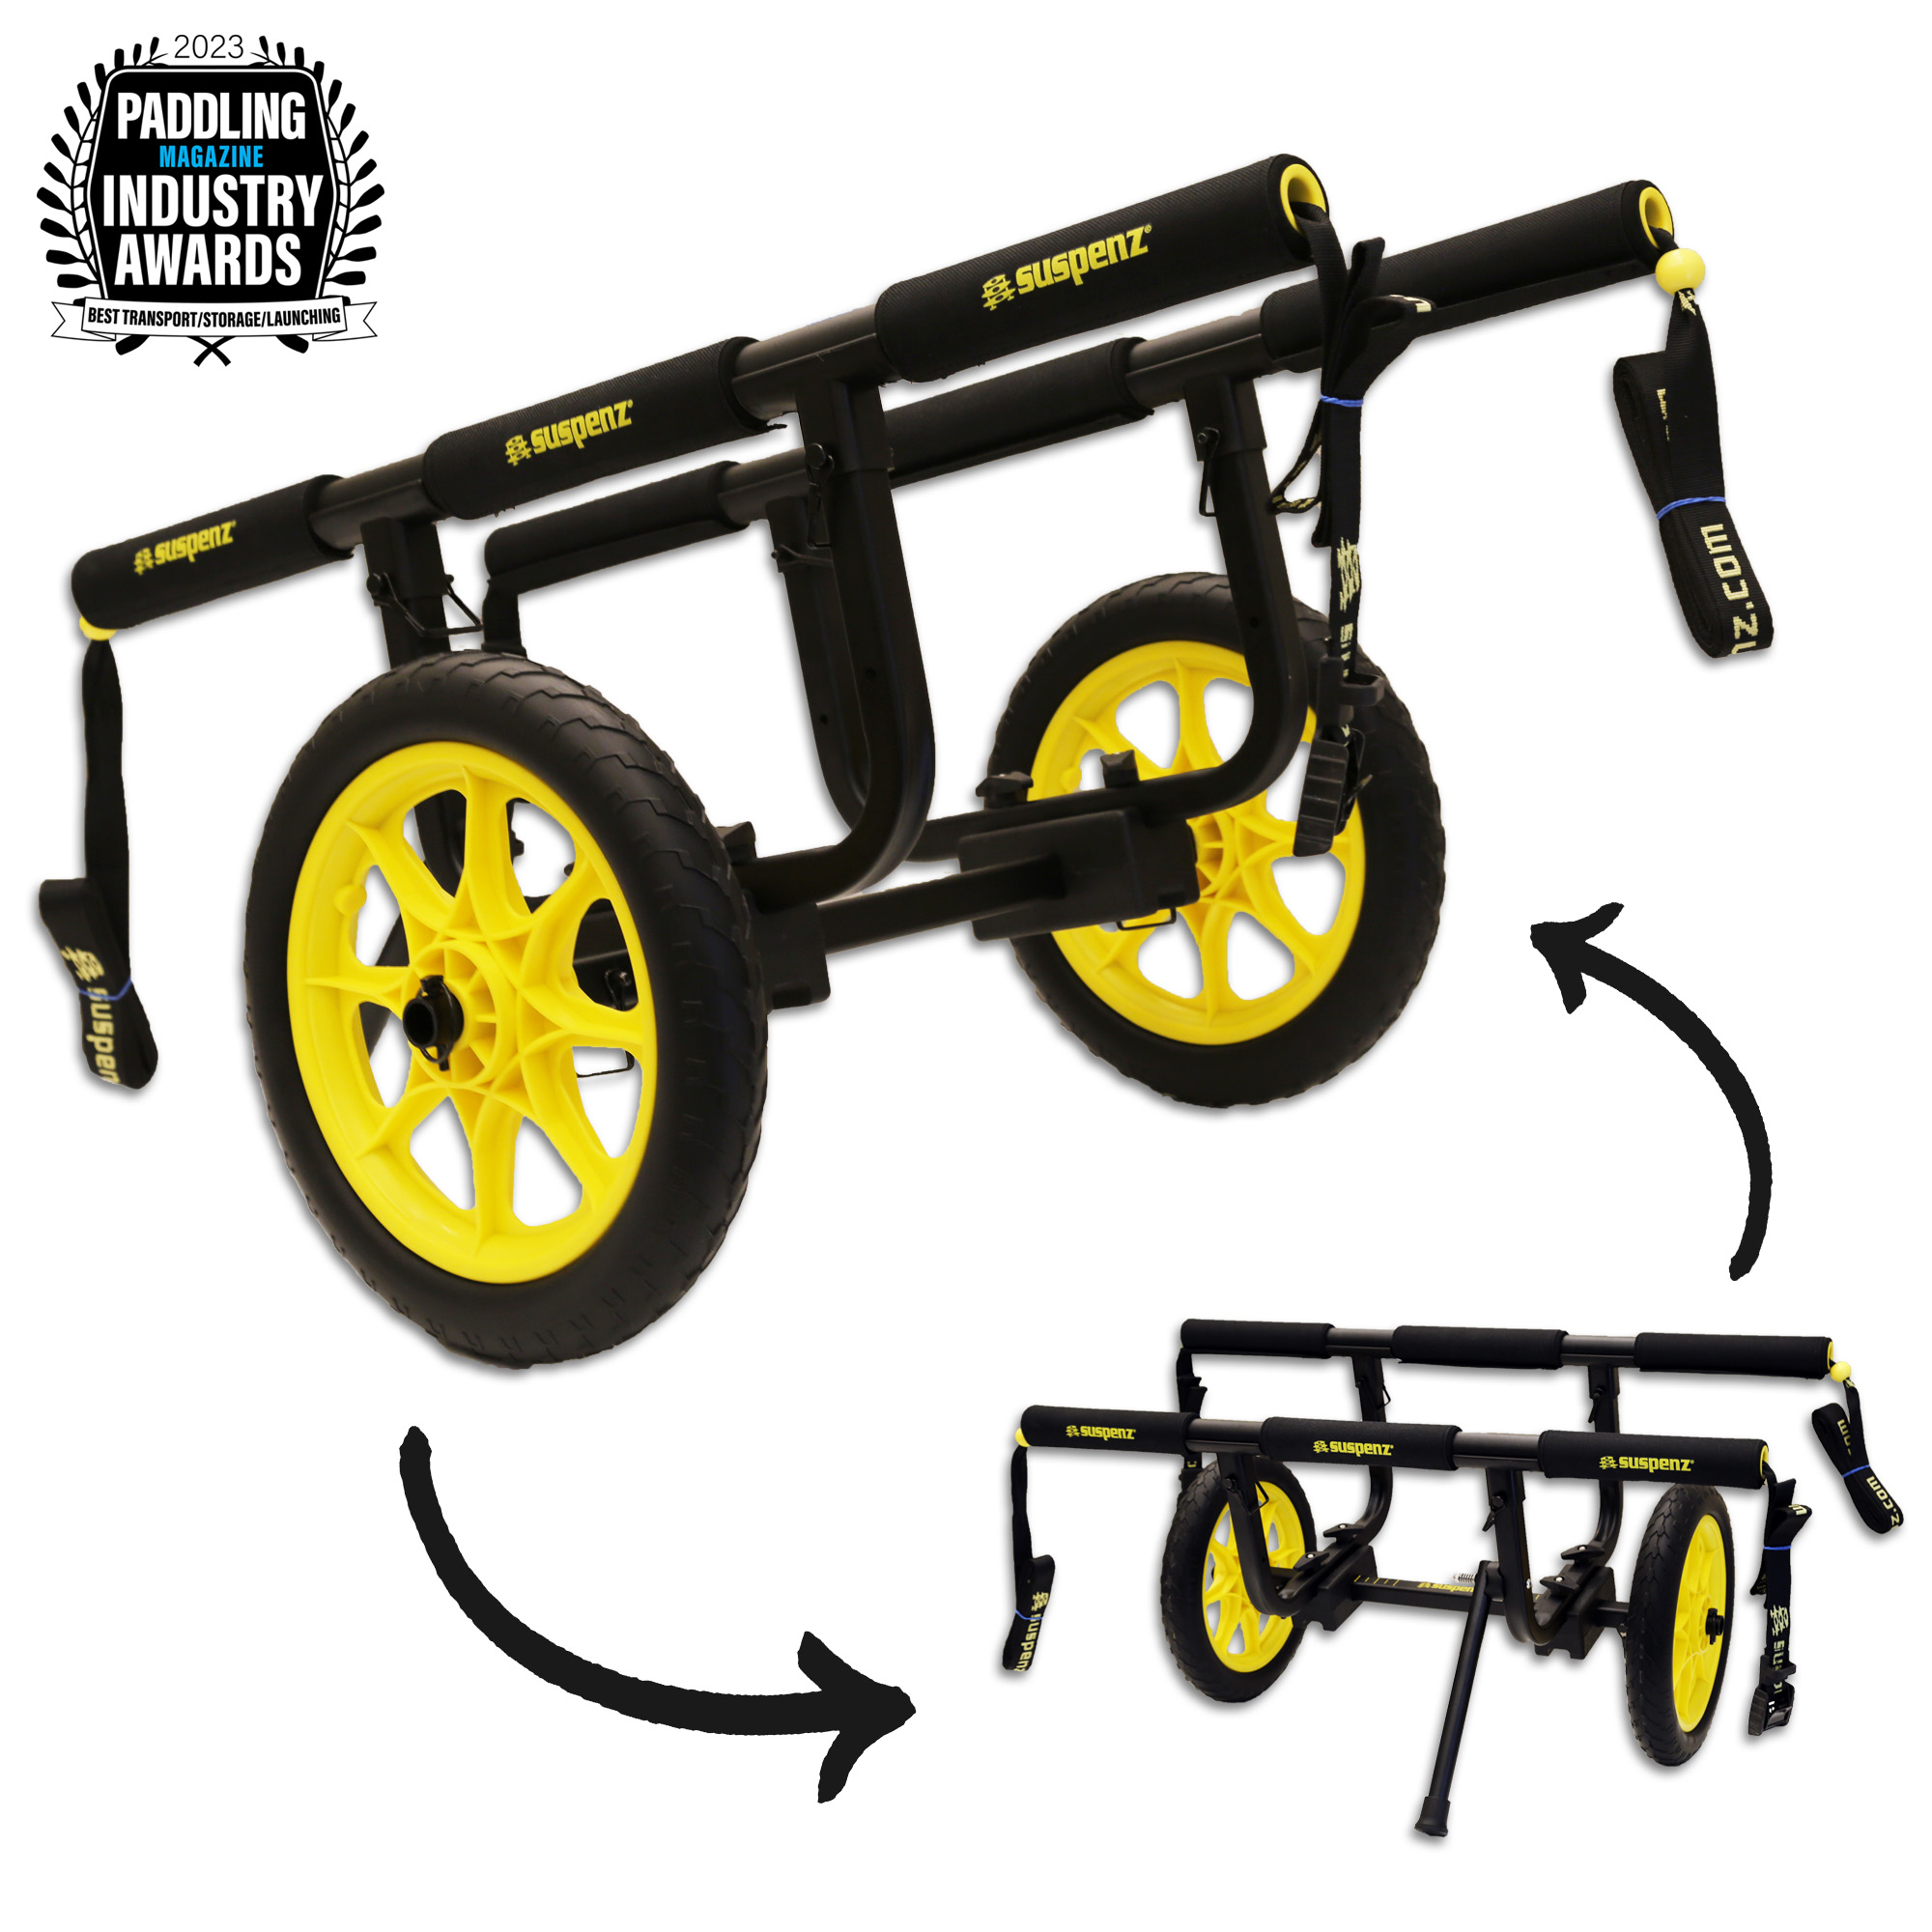 Suspenz Catch-All Universal Airless Cart [Paddling Buyer's Guide]